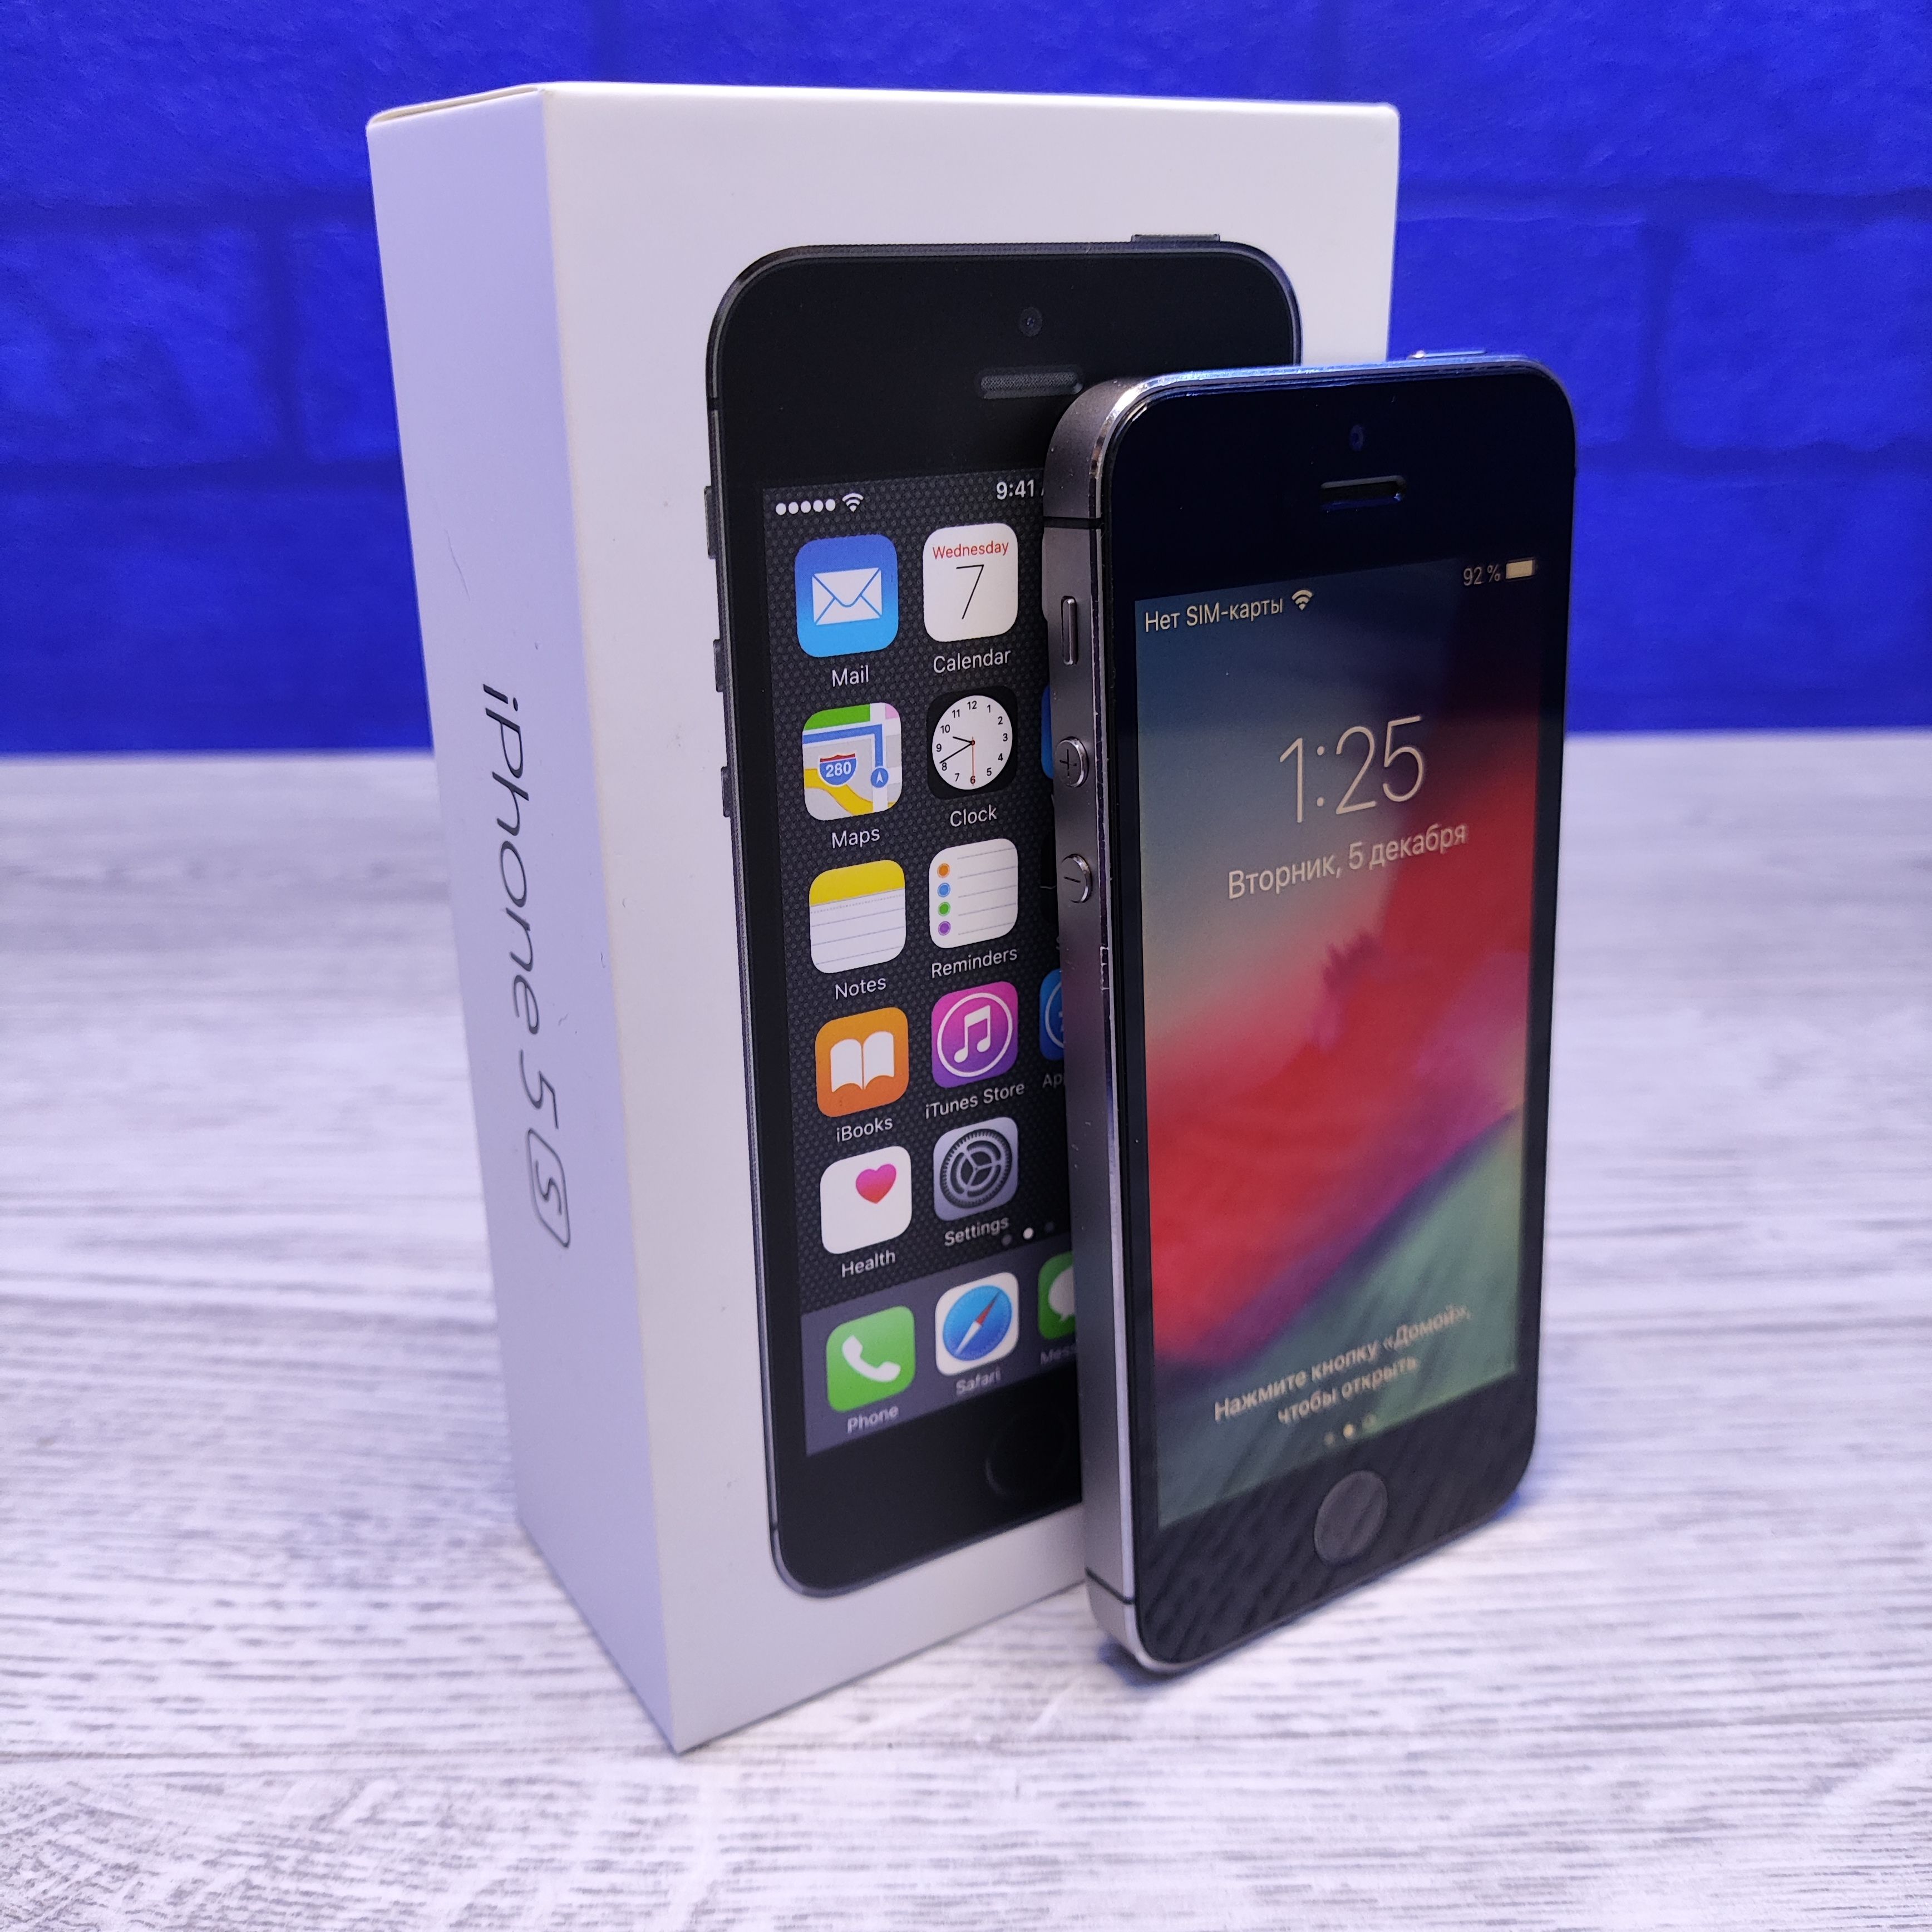 iphone 5s space grey box